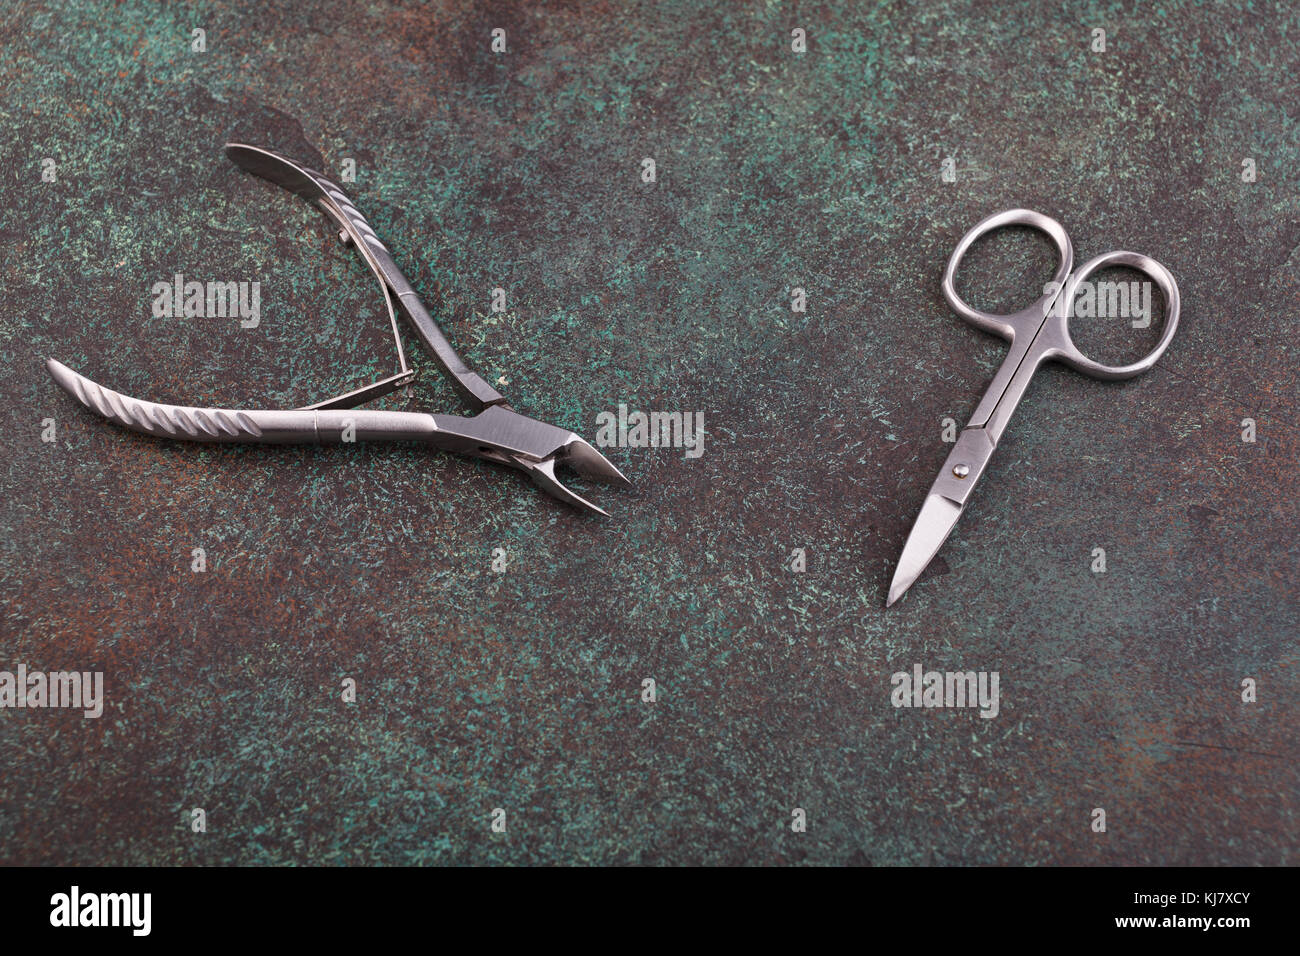 manicure scissors and nippers on a textured dark background Stock Photo